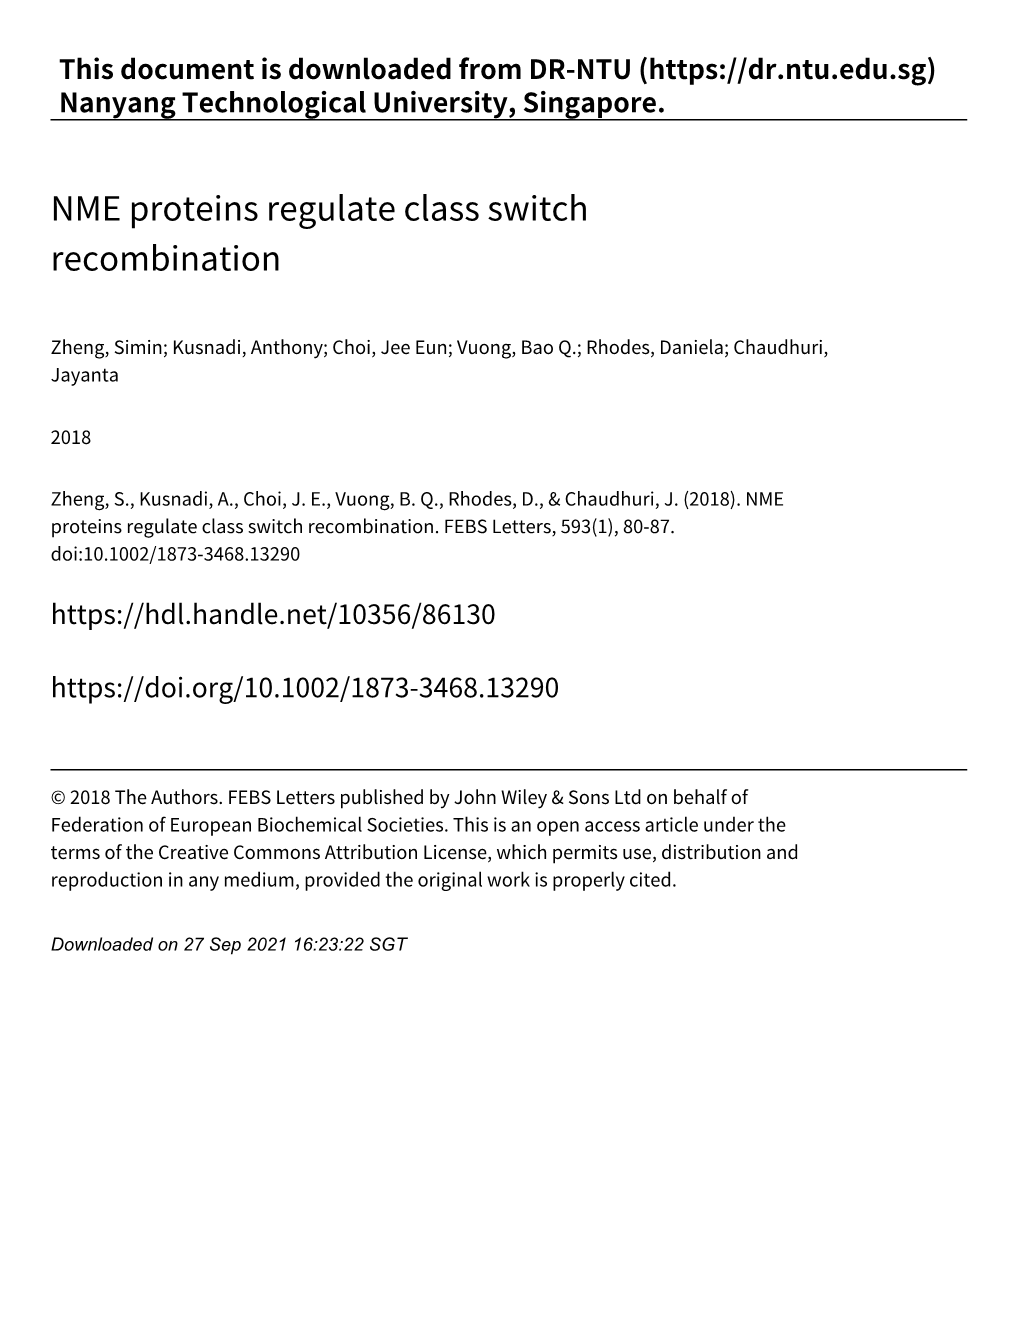 NME Proteins Regulate Class Switch Recombination